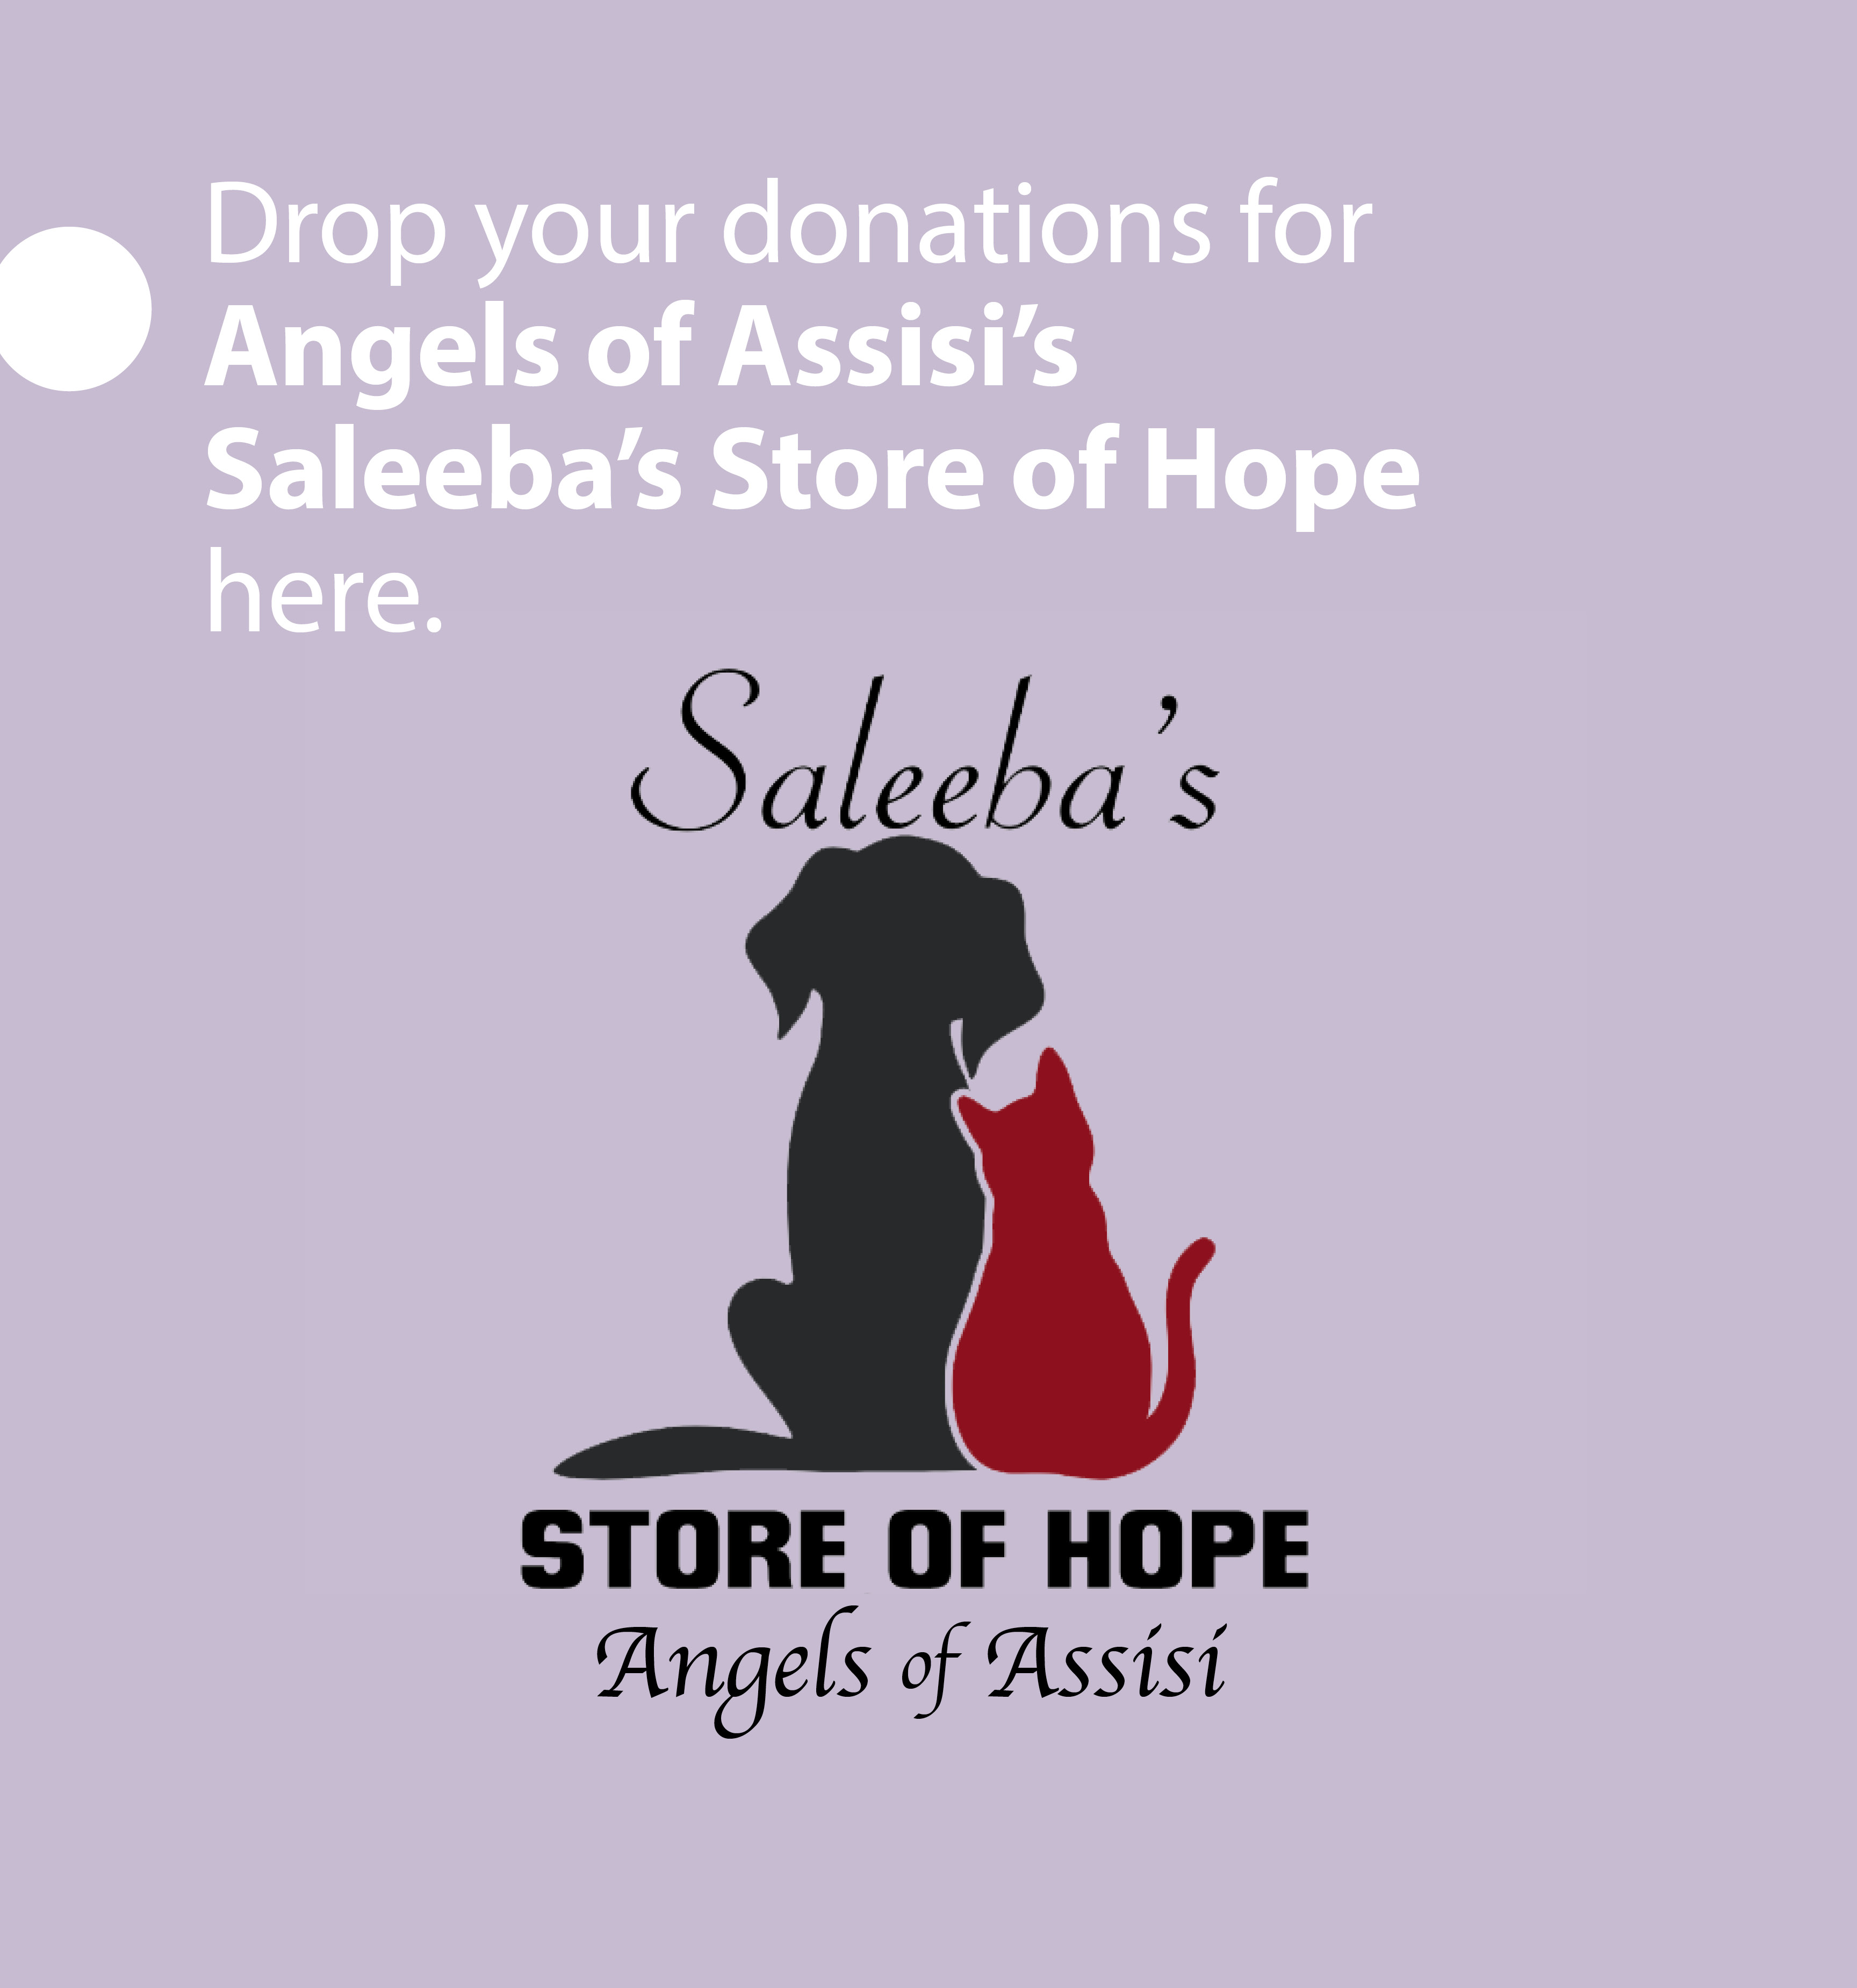 <a href=https://www.angelsofassisi.org/programs/saleebas-store-of-hope/>CLICK FOR MORE INFORMATION</a>